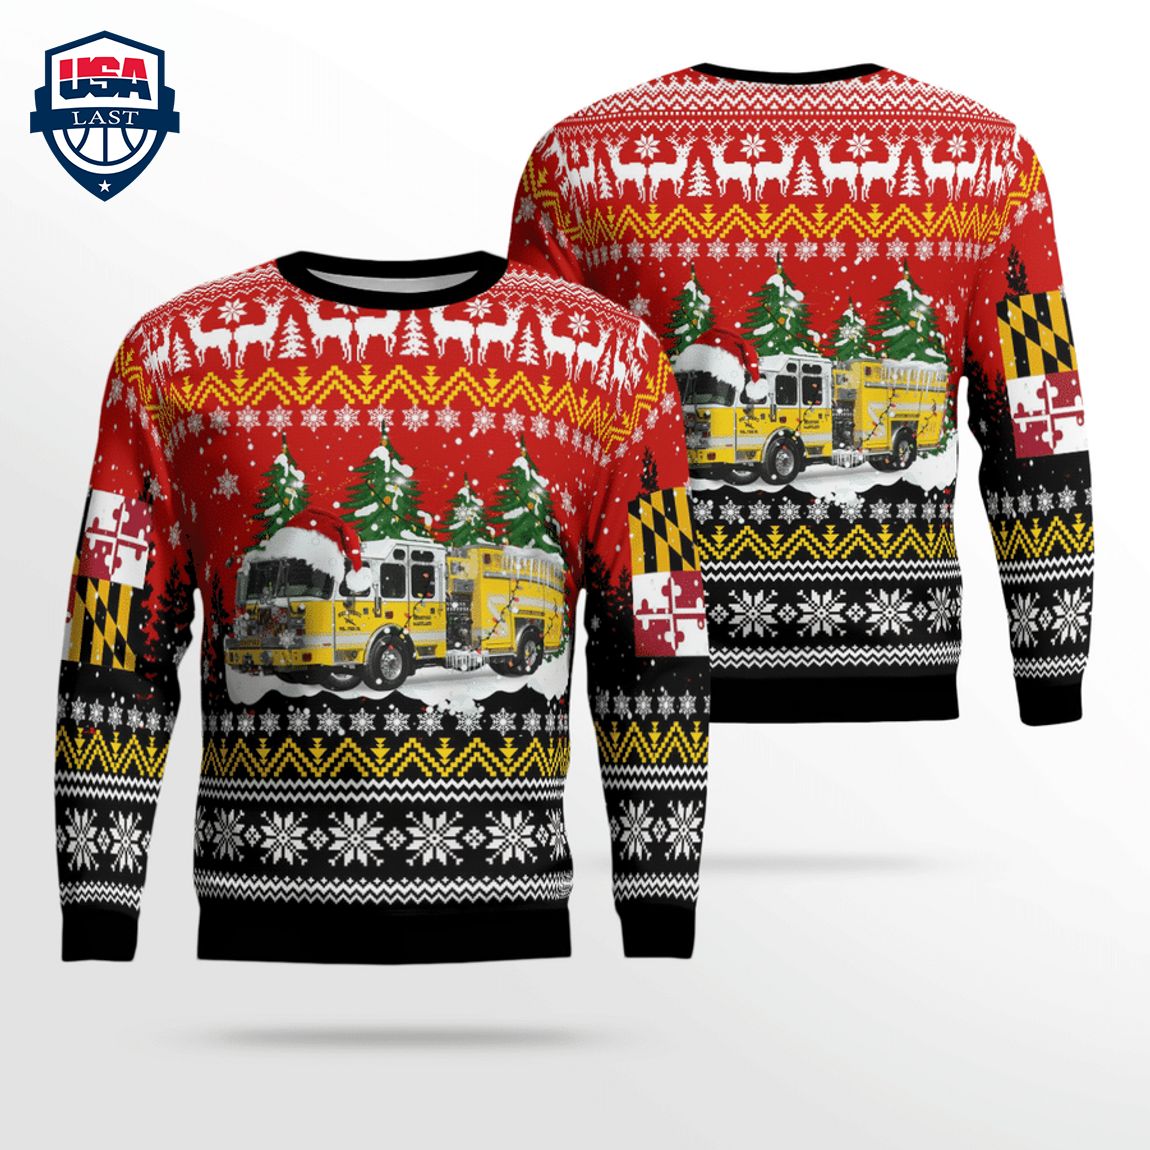 Hereford Volunteer Fire Company 3D Christmas Sweater